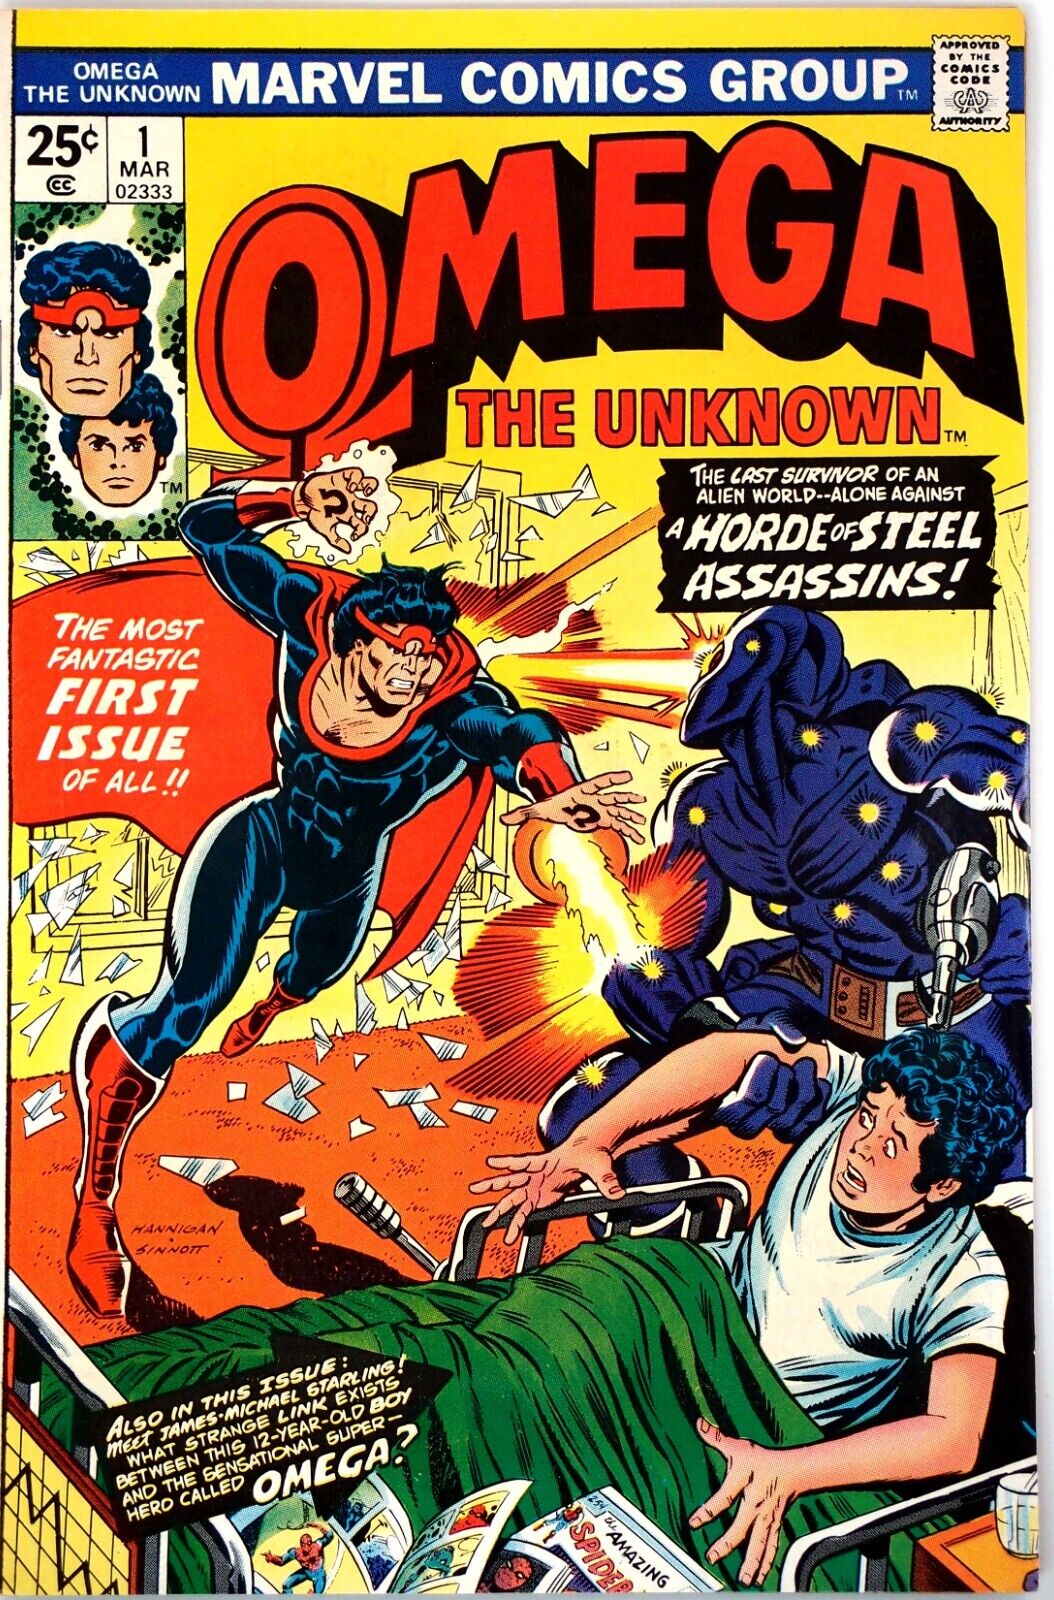 CULT CLASSIC: Omega the Unknown, full run, all issues of rare 1970s Marvel title